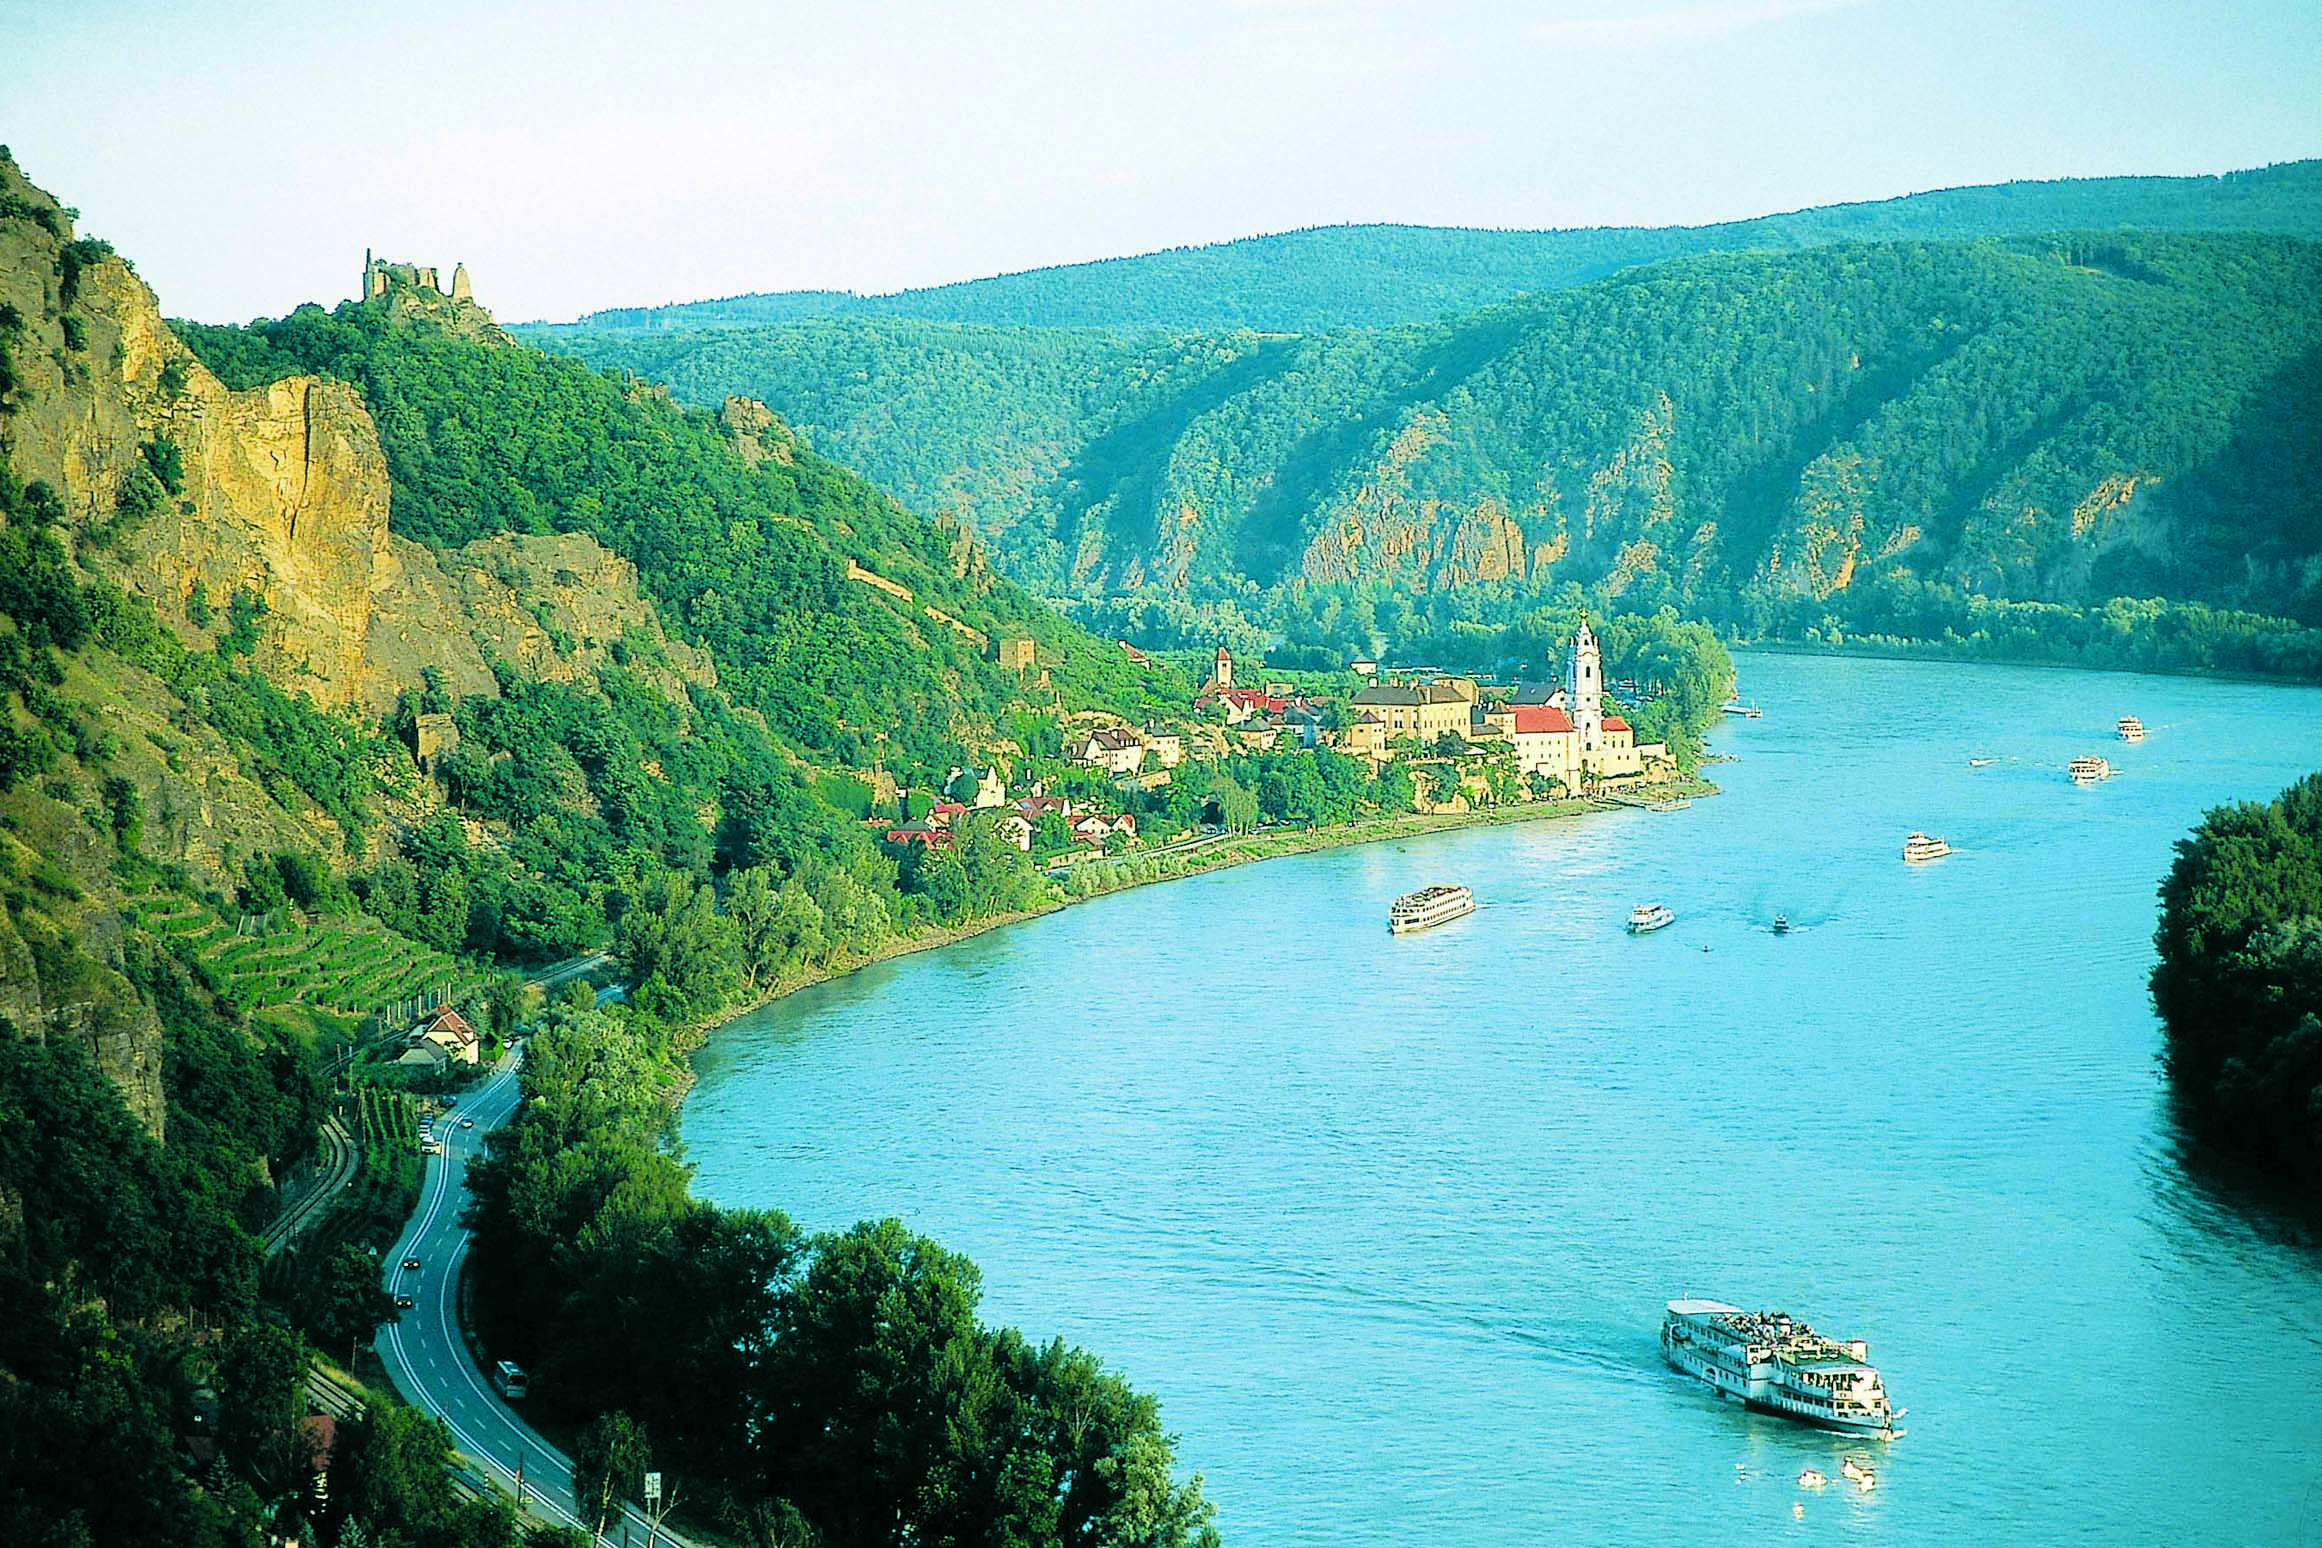 H2olidays : Details about your river cruises